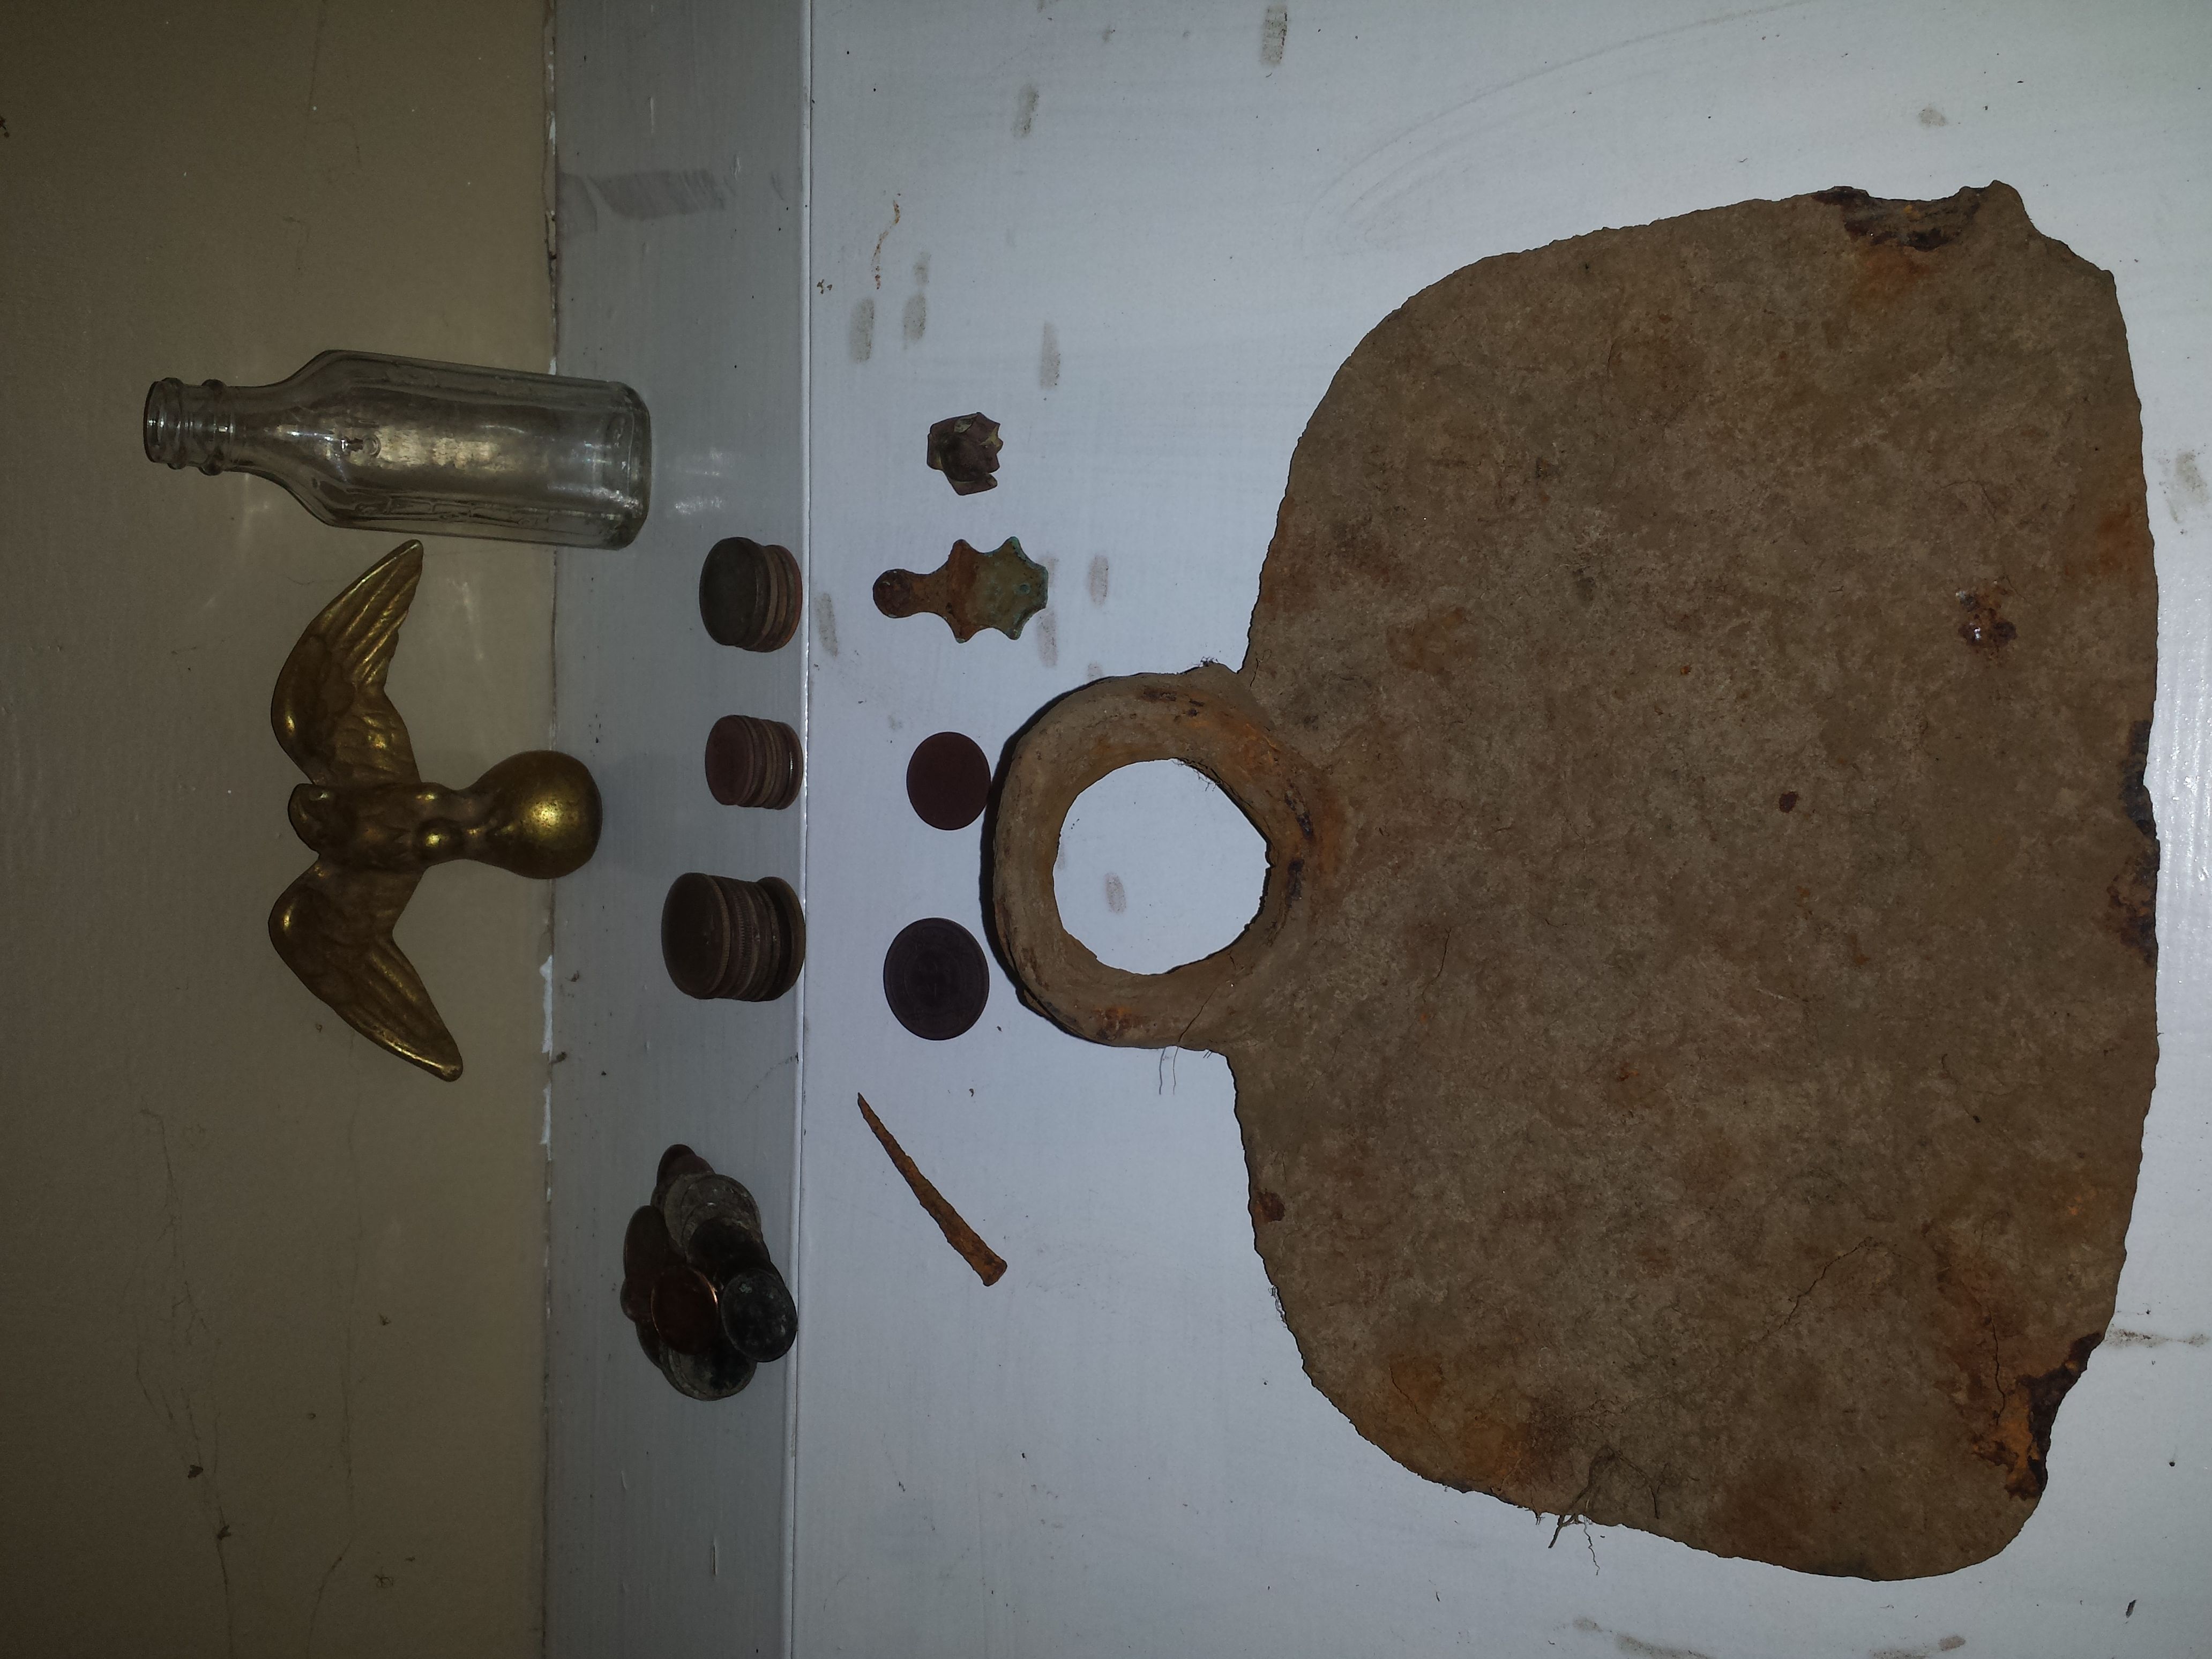 20150724 Collection of relics found around a house built in 1860 on private property in Crystal Springs with the F75.